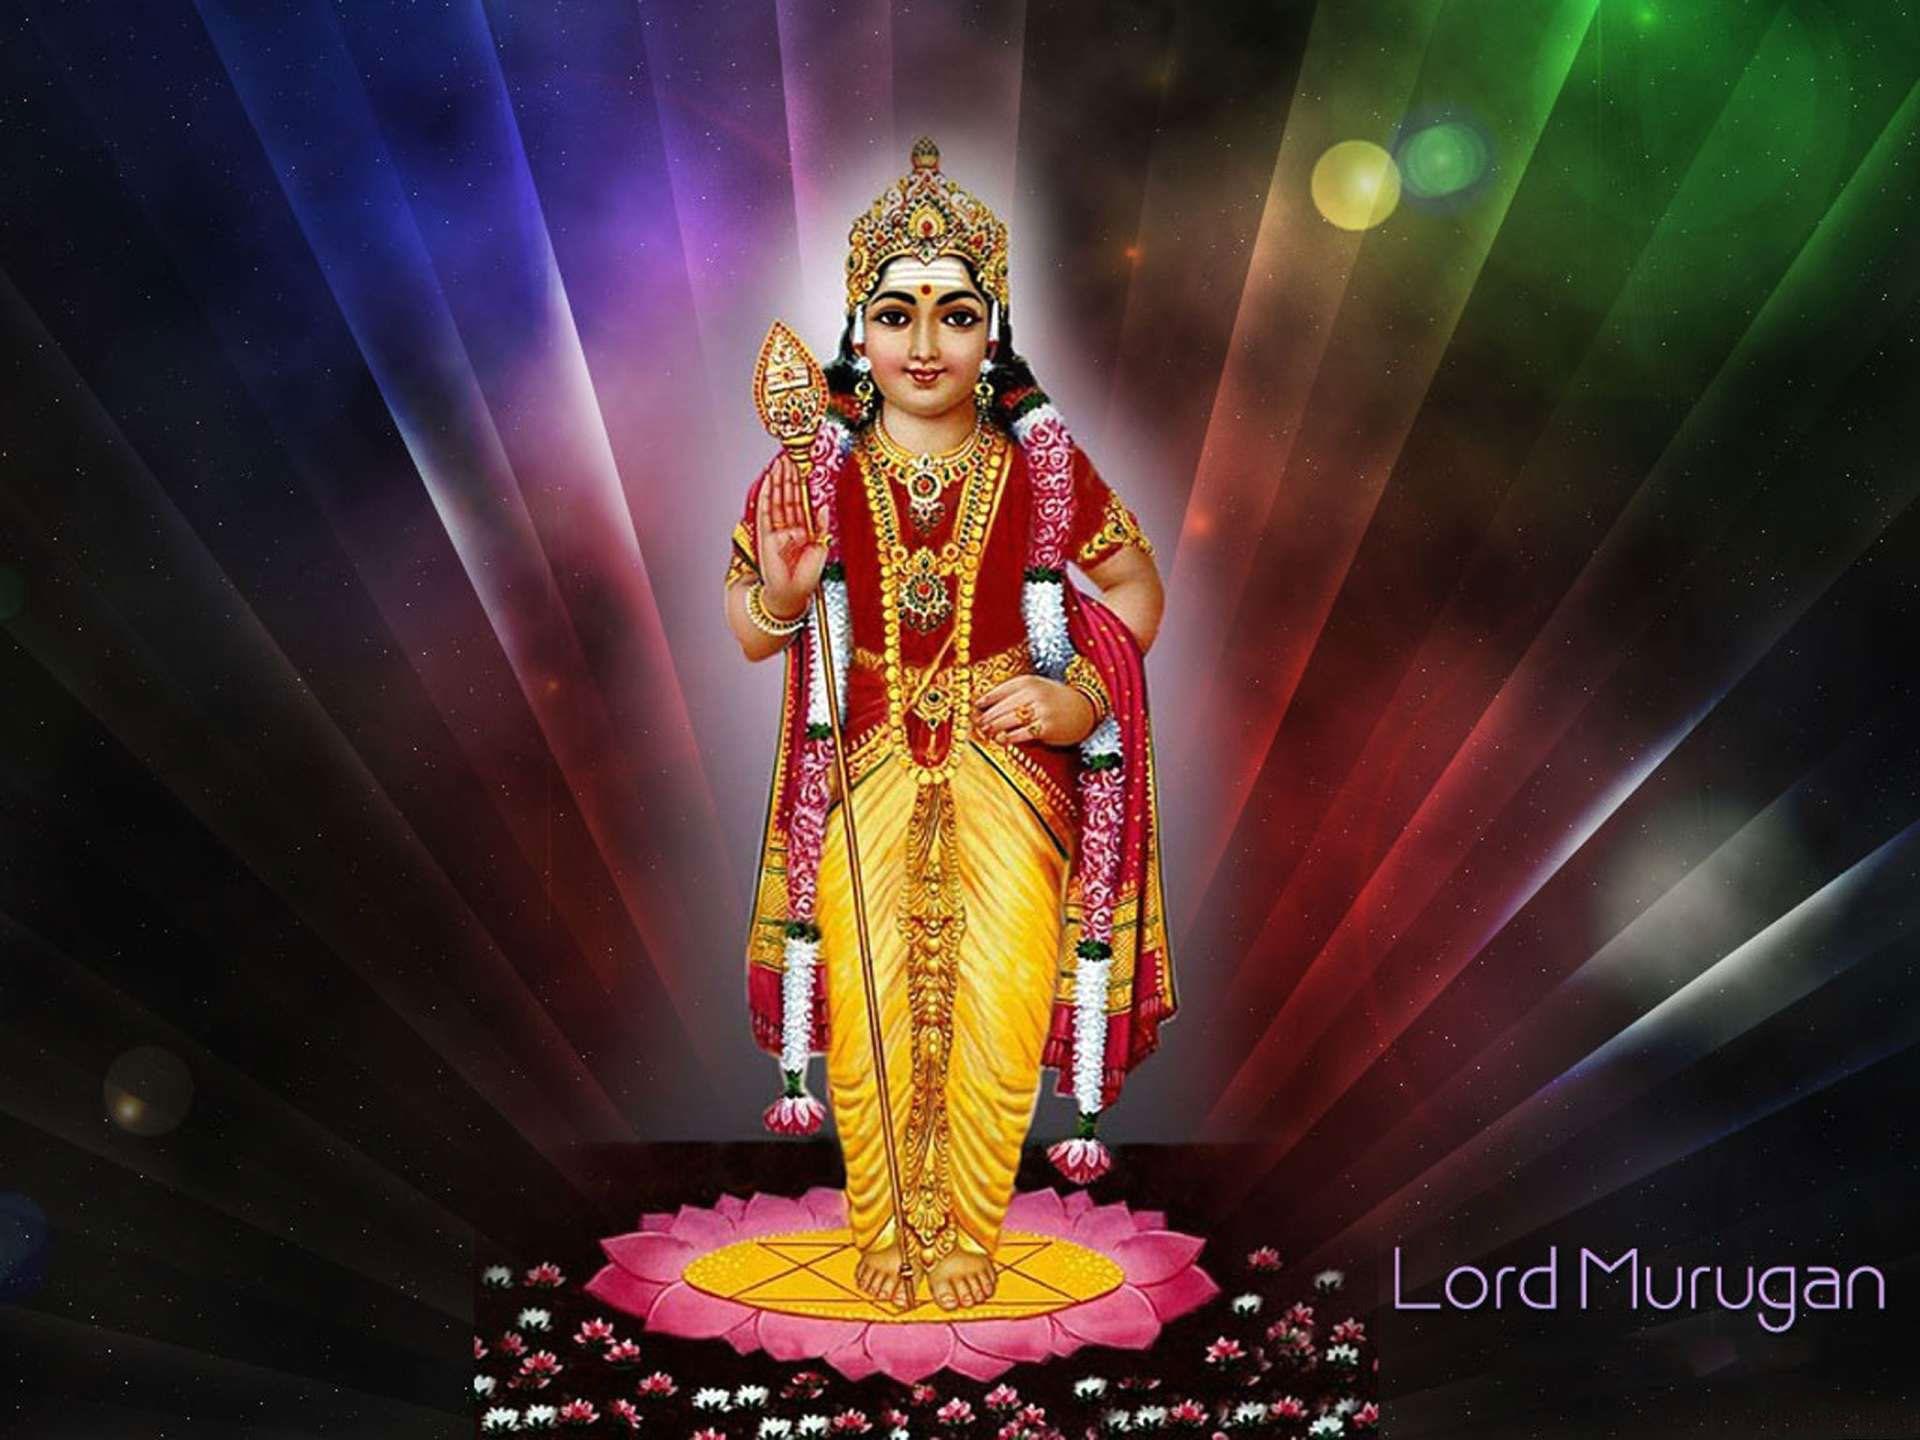 Soorasamharam 2022 Images  Lord Murugan HD Wallpapers For Free Download  Online Celebrate Tiruchendur Soorasamharam Festival in Tamil Nadu With  WhatsApp Messages and Greetings   LatestLY